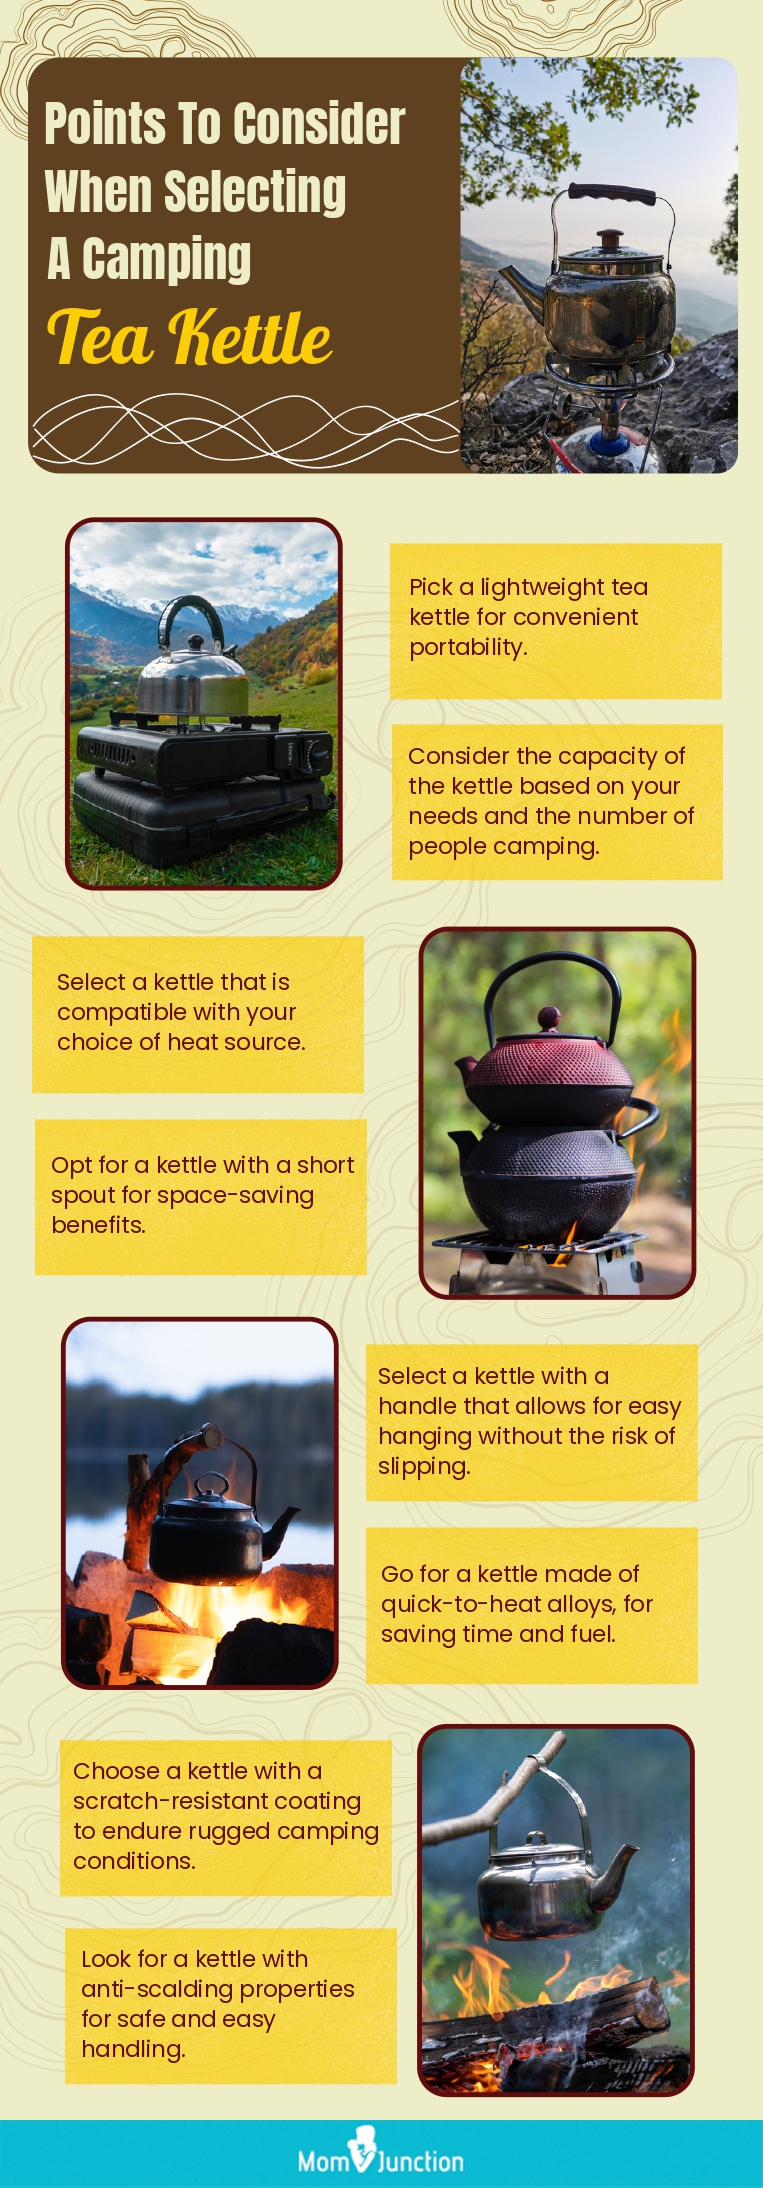 Points To Consider When Selecting The Right Camping Tea Kettle (infographic)